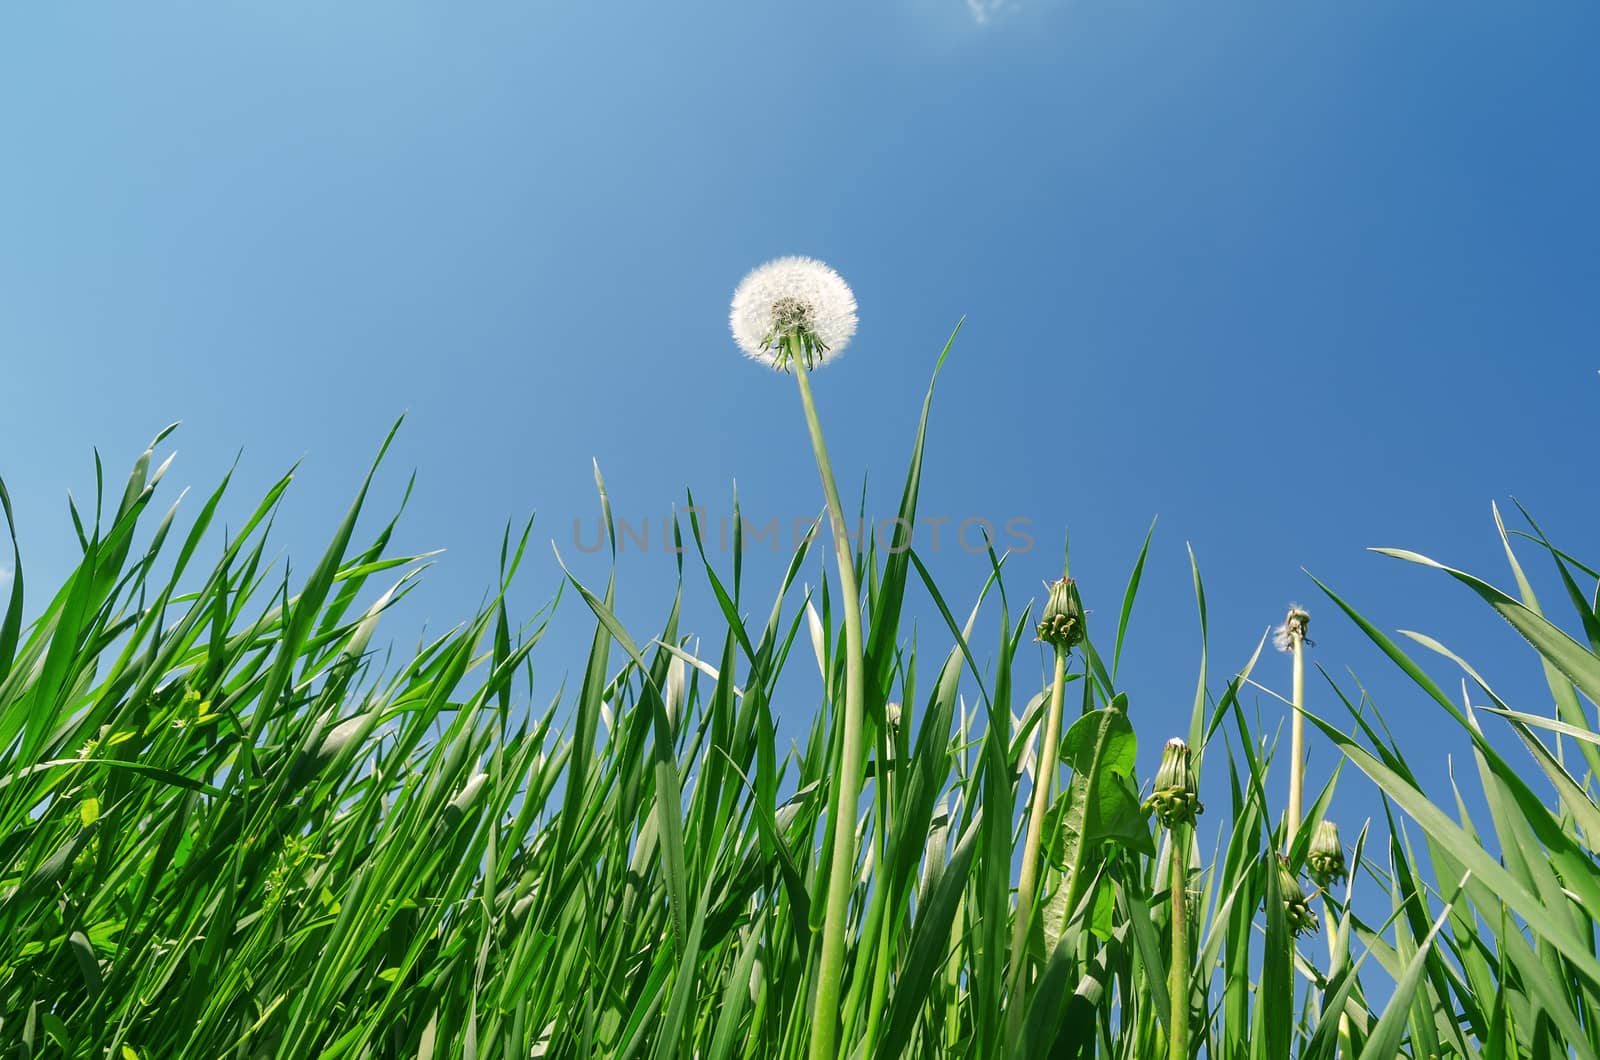 dandelion and green grass under blue sky by mycola